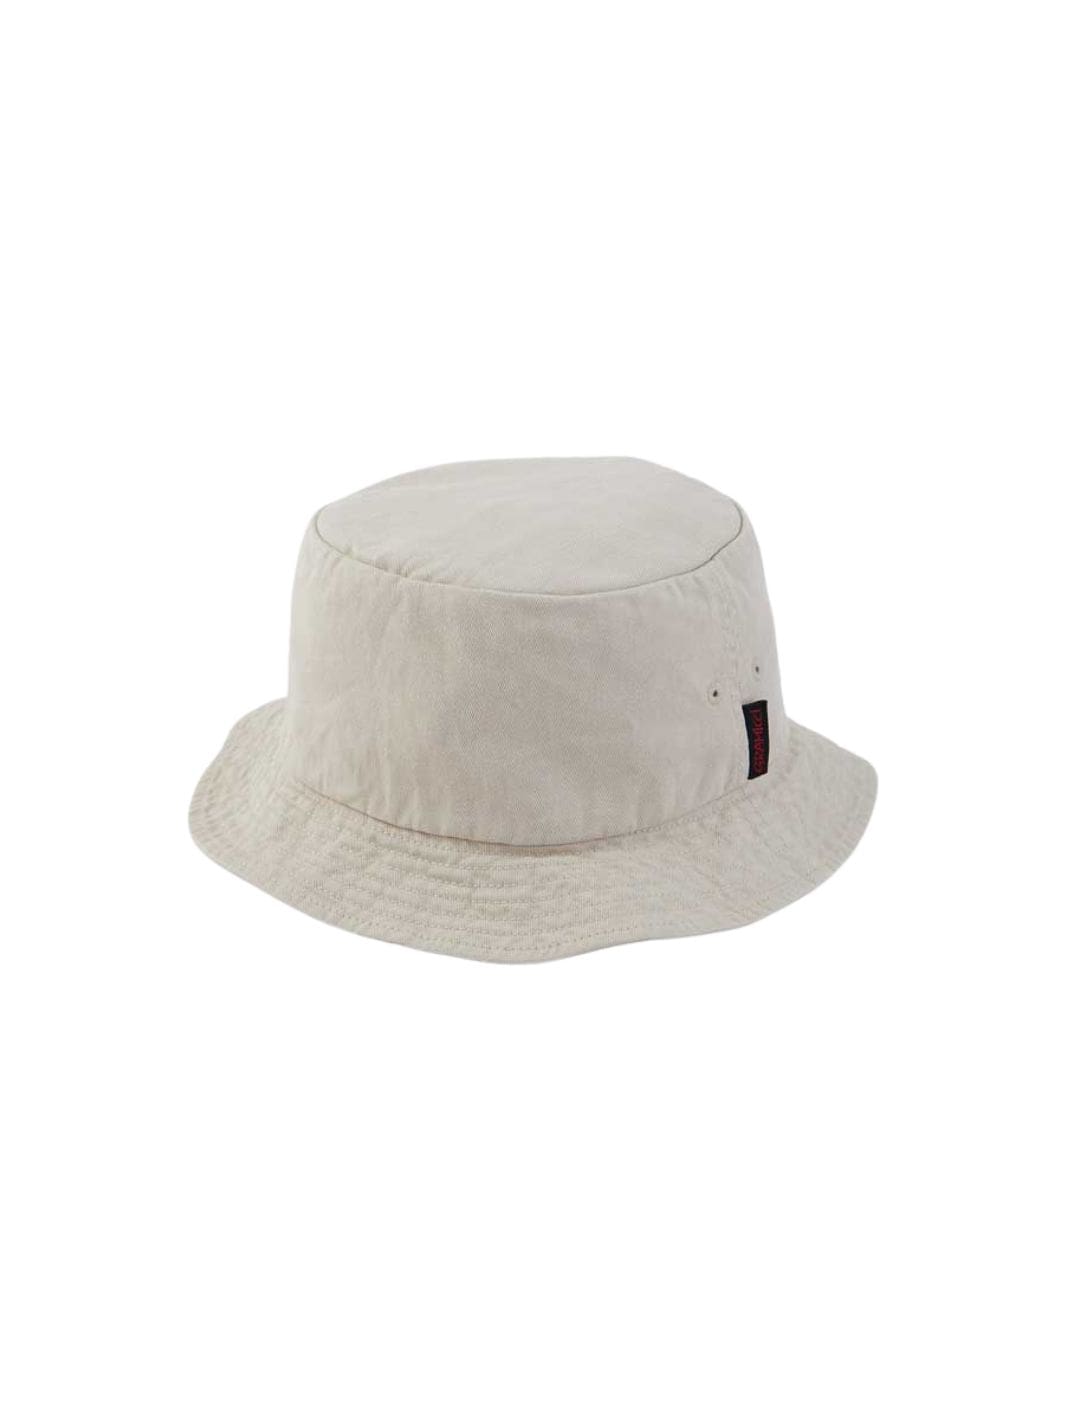 Gramicci Accessories M/L / Chino Packable Bucket Hat Chino